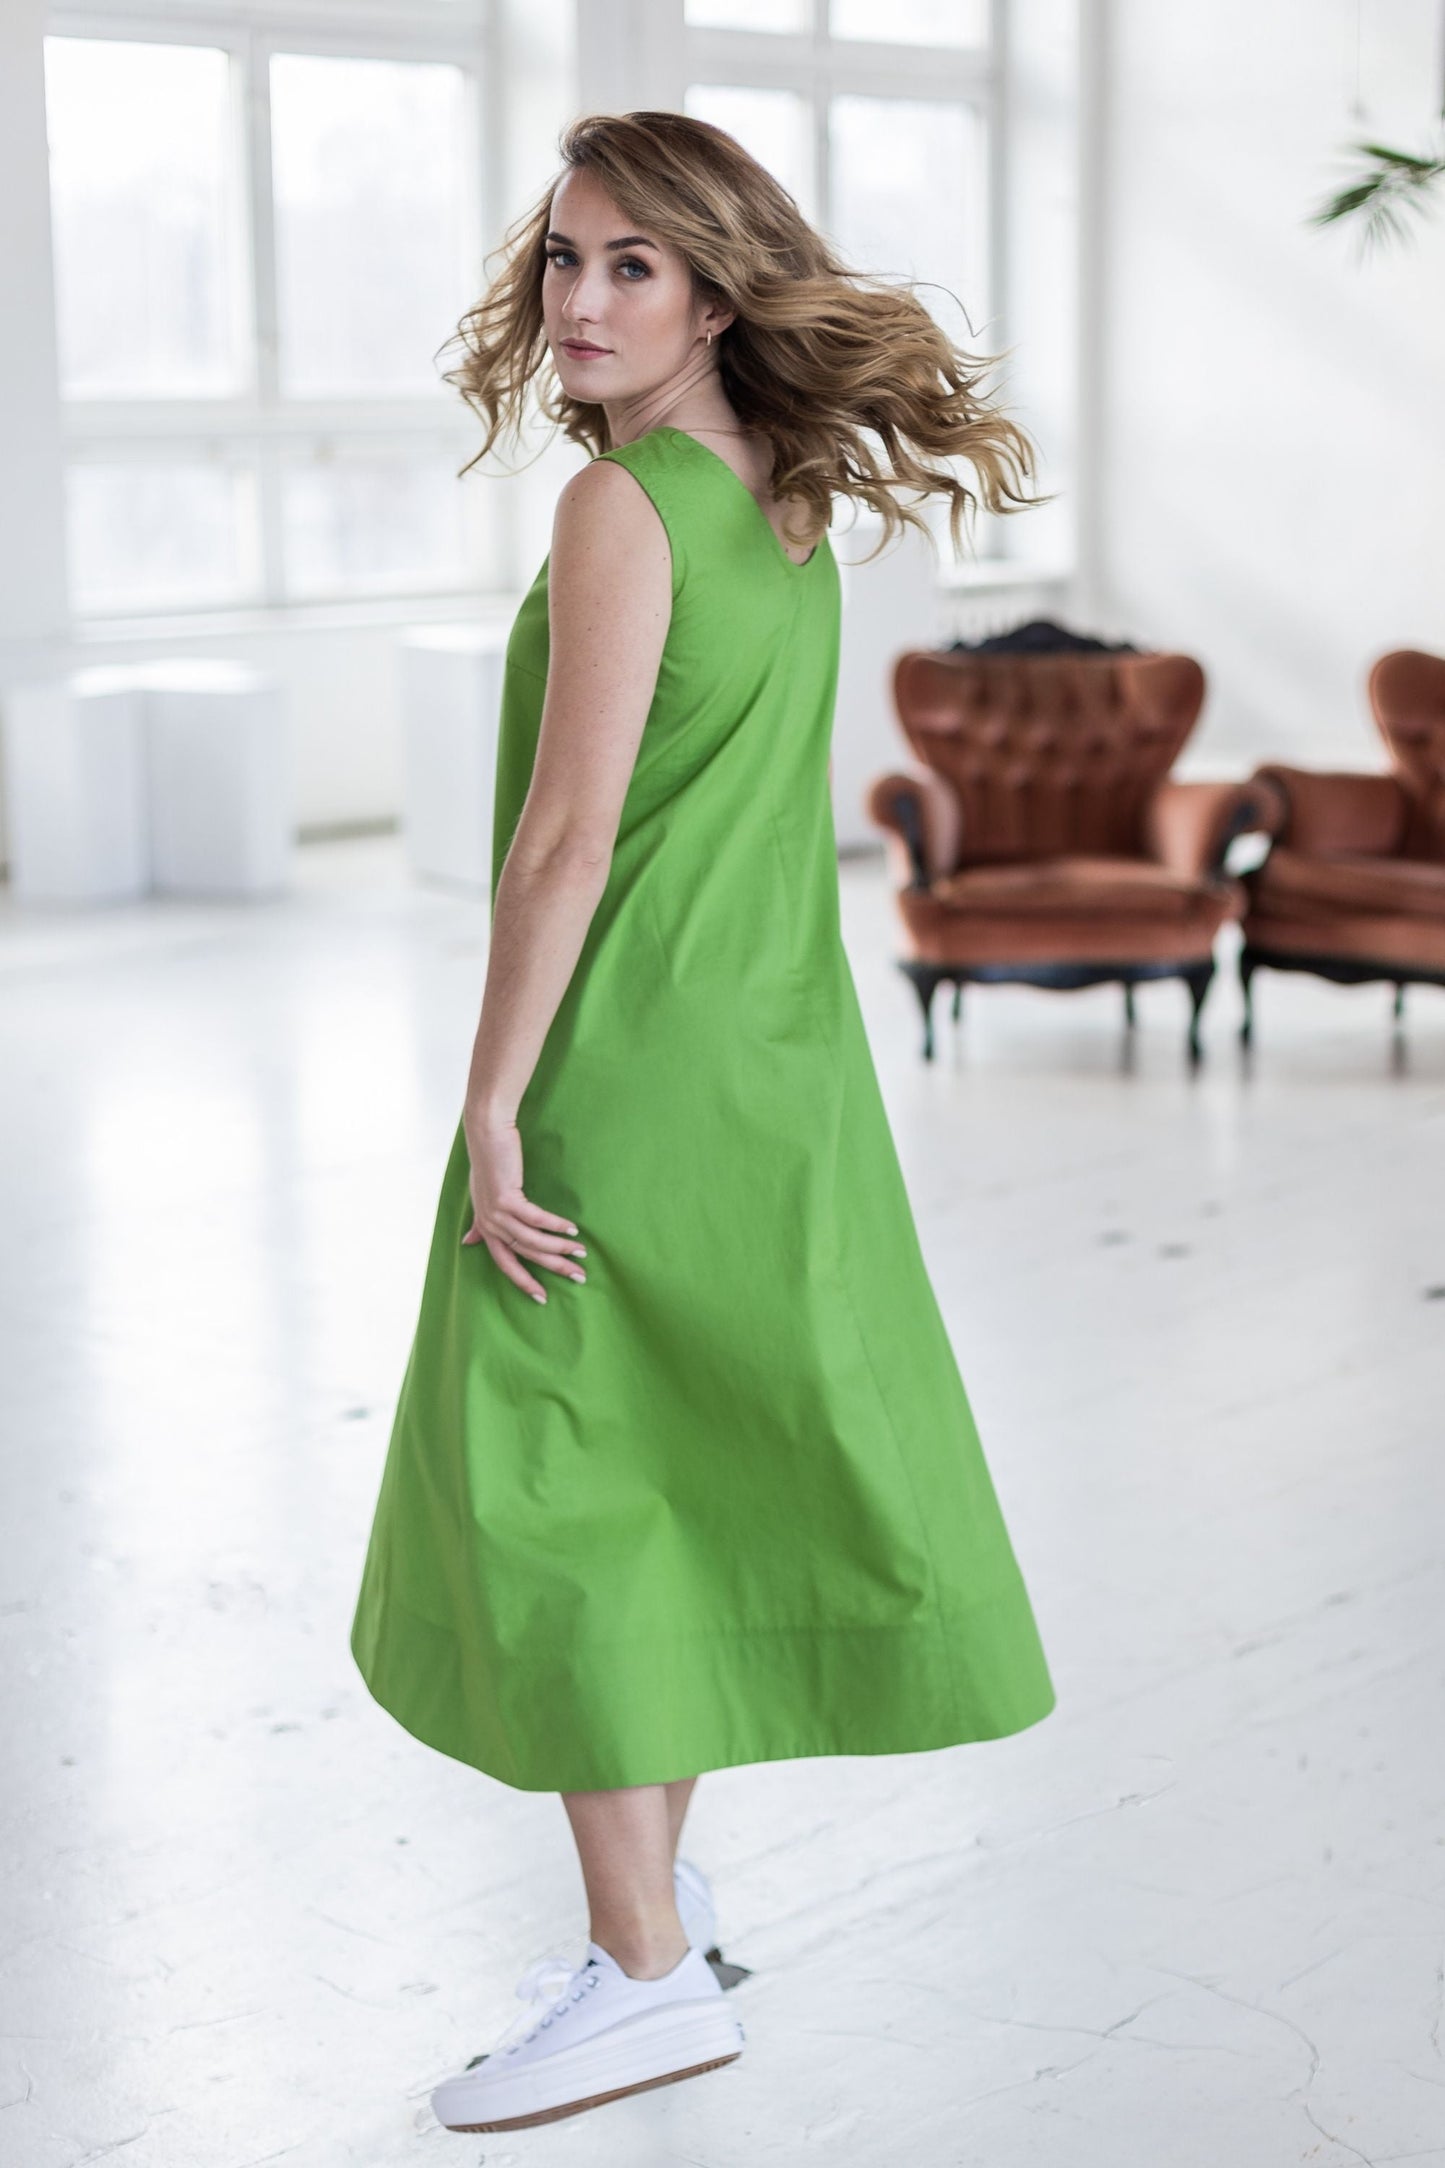 Green bell dress with pockets